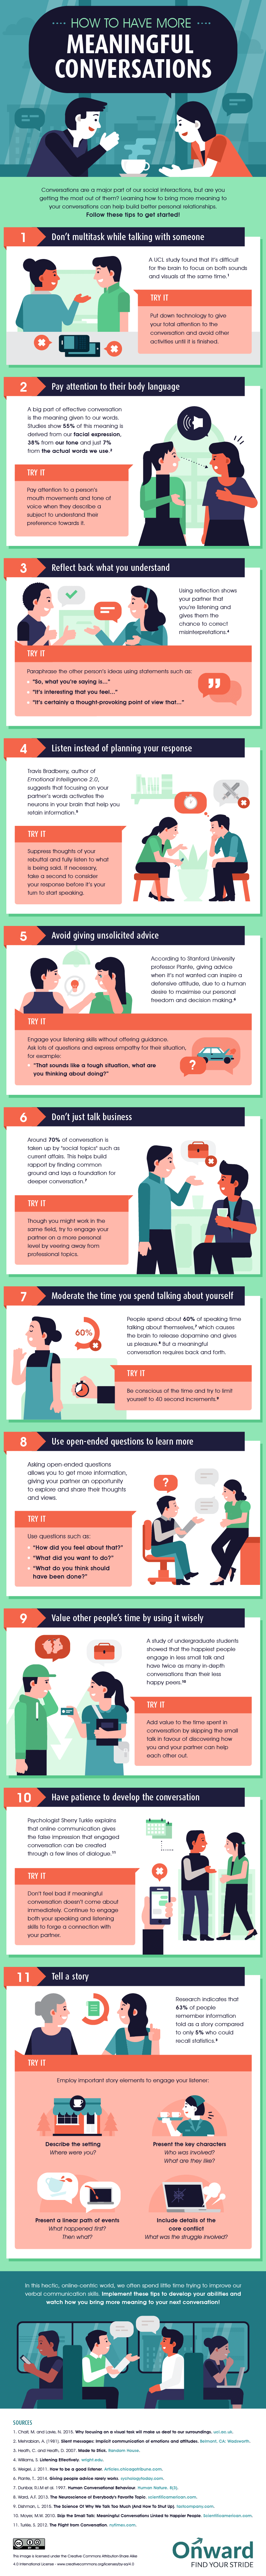 Infographic showing a number of tips about having meaningful conversations.